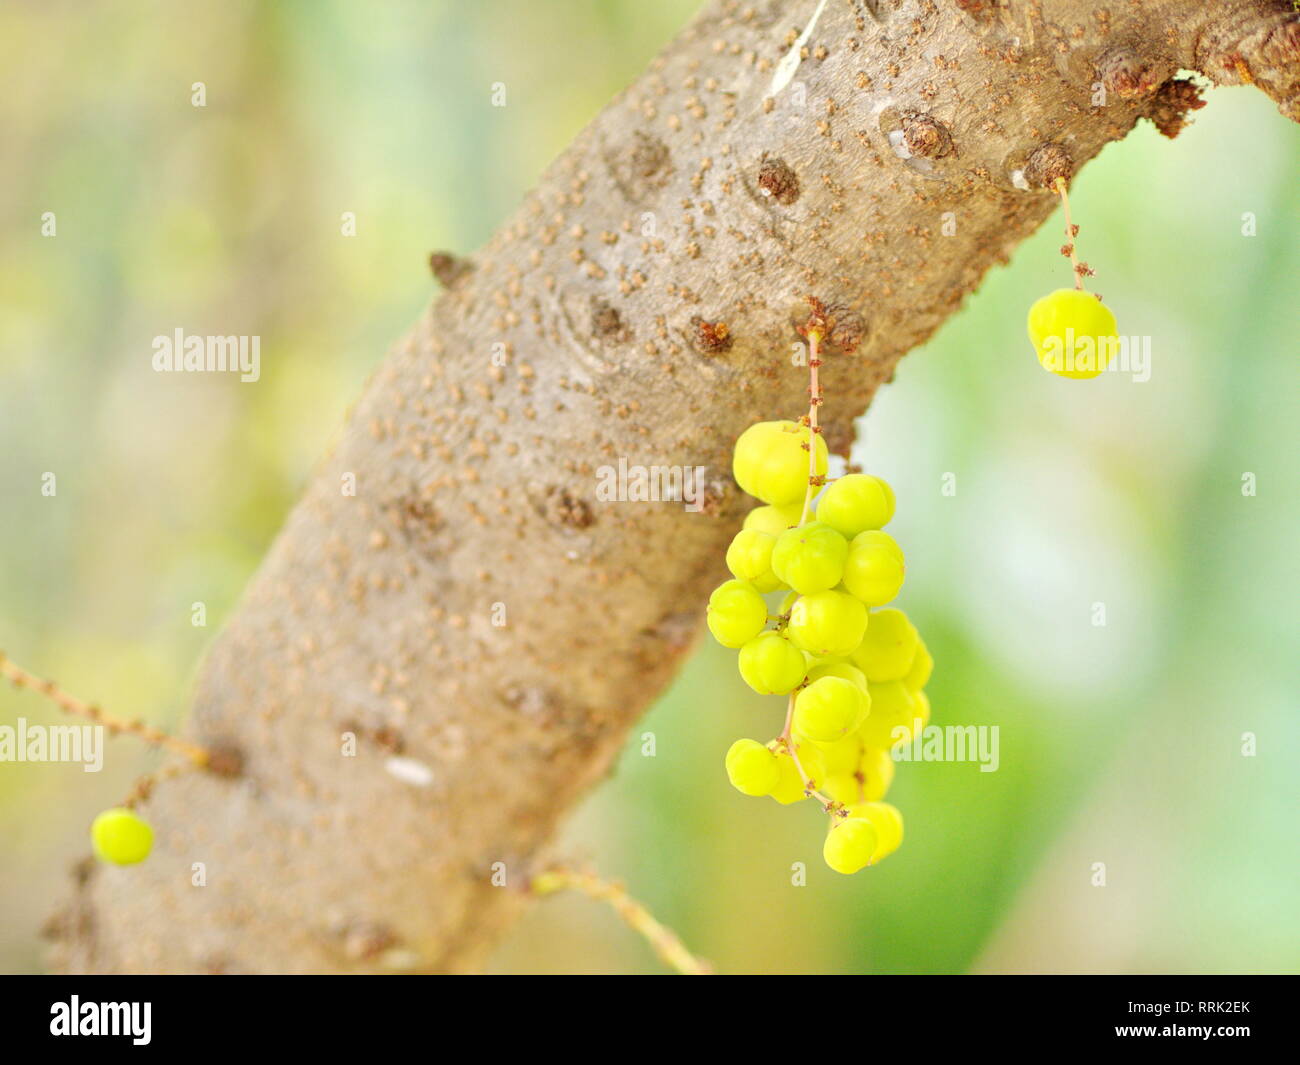 many of the Star Gooseberry on the Tree in Thailand Local Village with The Natural morning Light Stock Photo